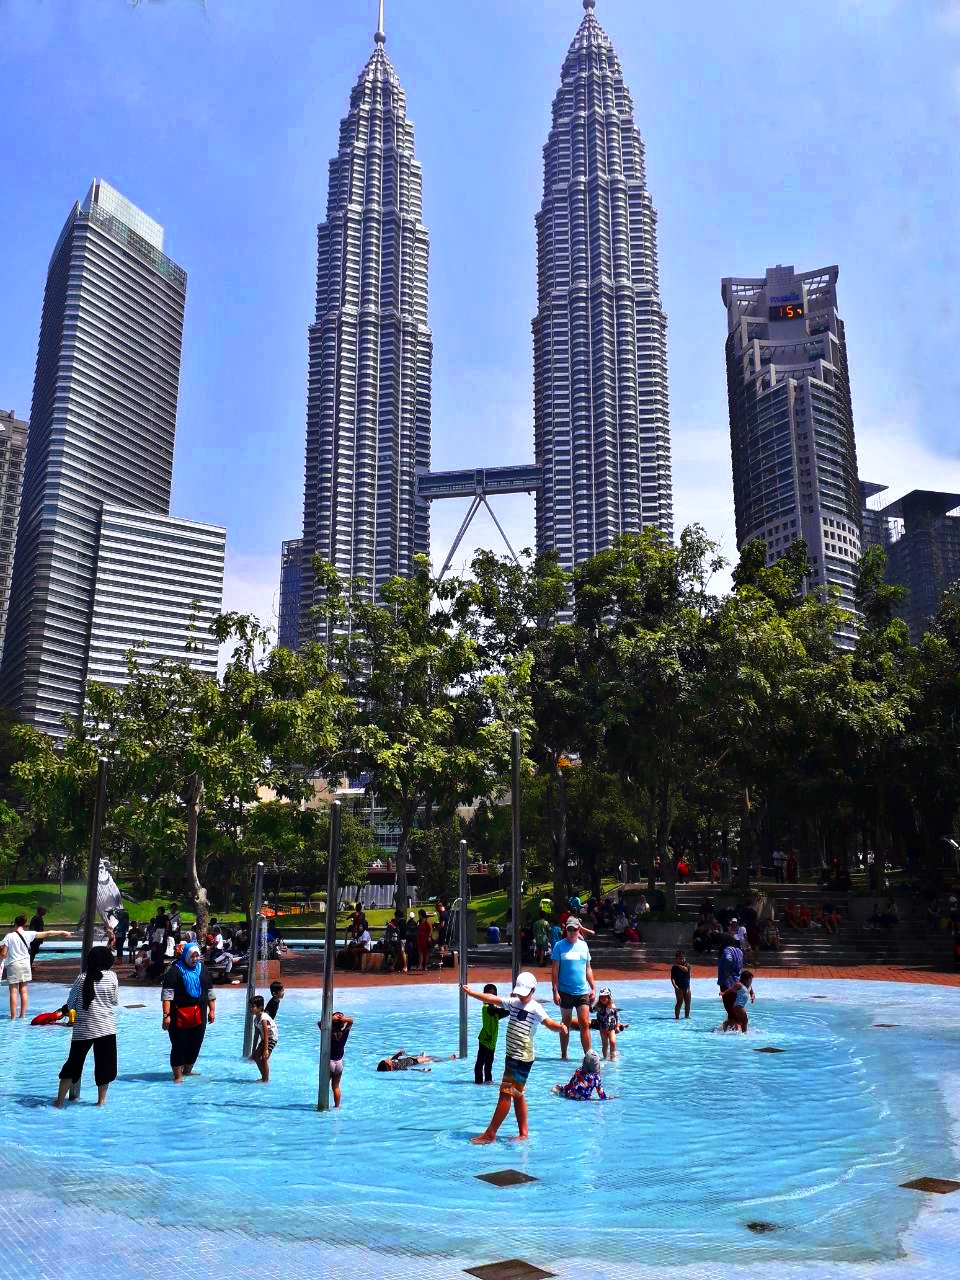 Refreshing kids pool in KL Eco Park overlooked by Petronas Towers